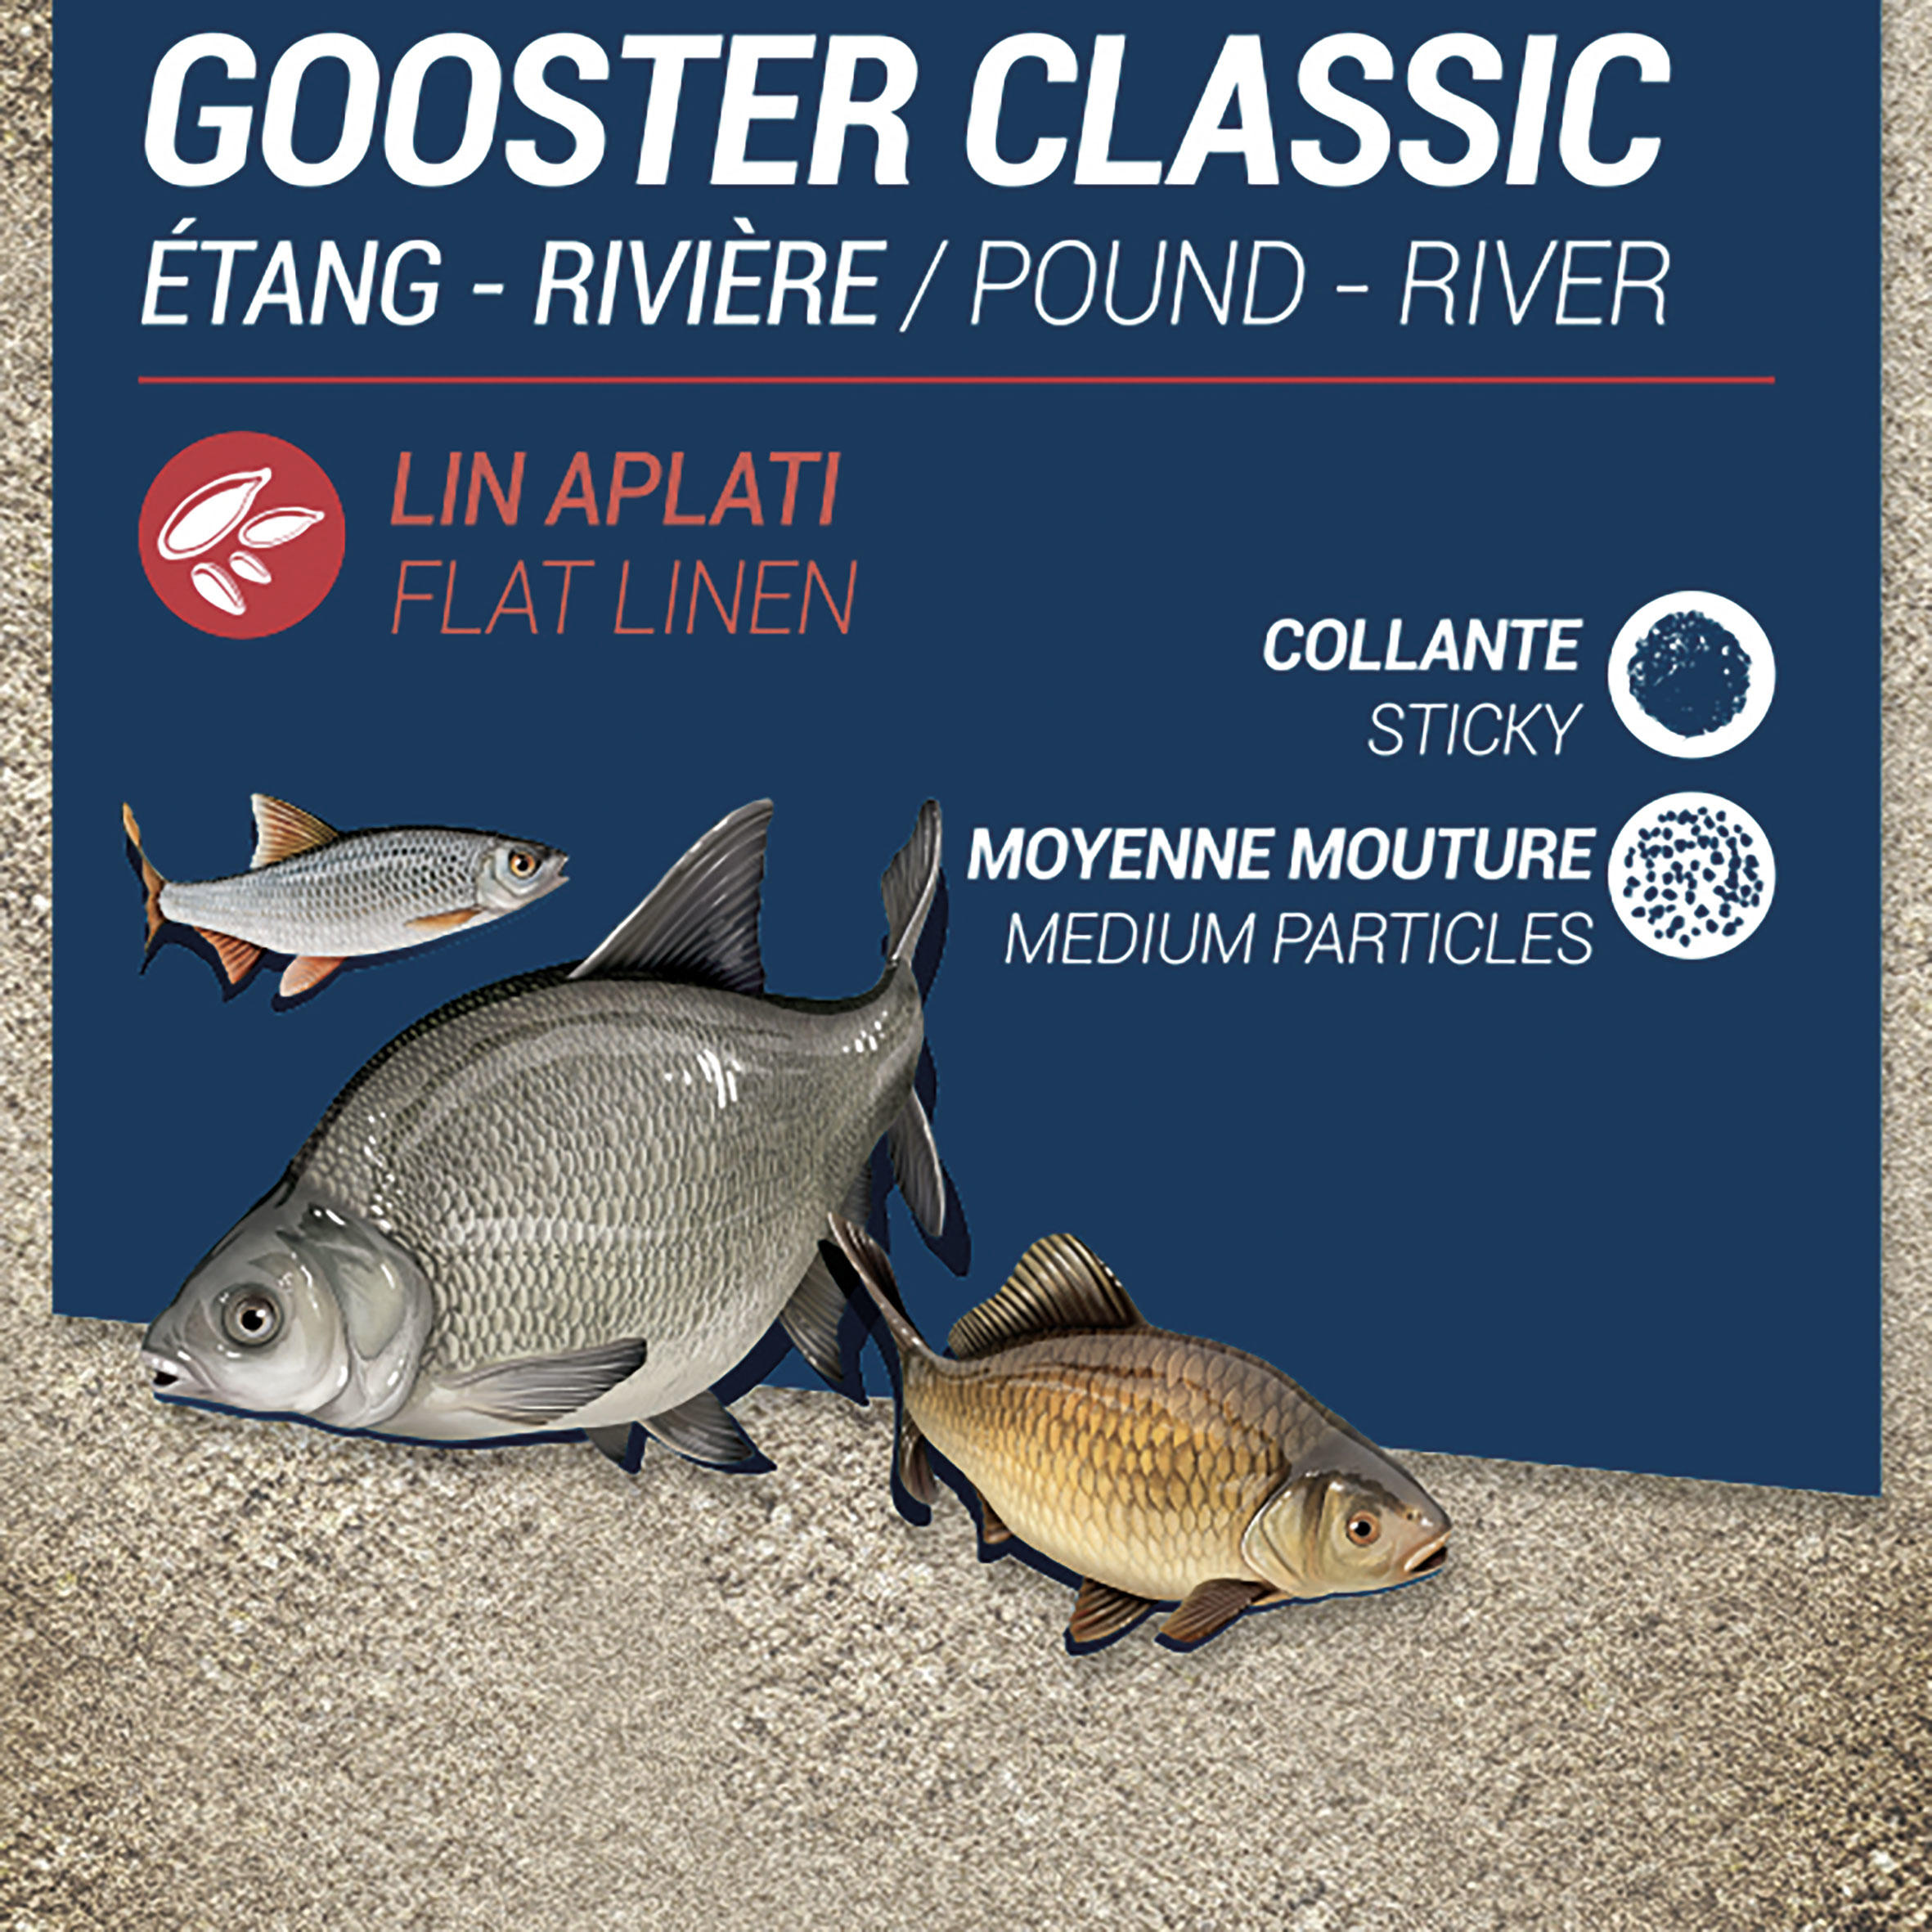 GOOSTER CLASSIC BAIT FOR ALL FISH 4X4 1 kg 2/5